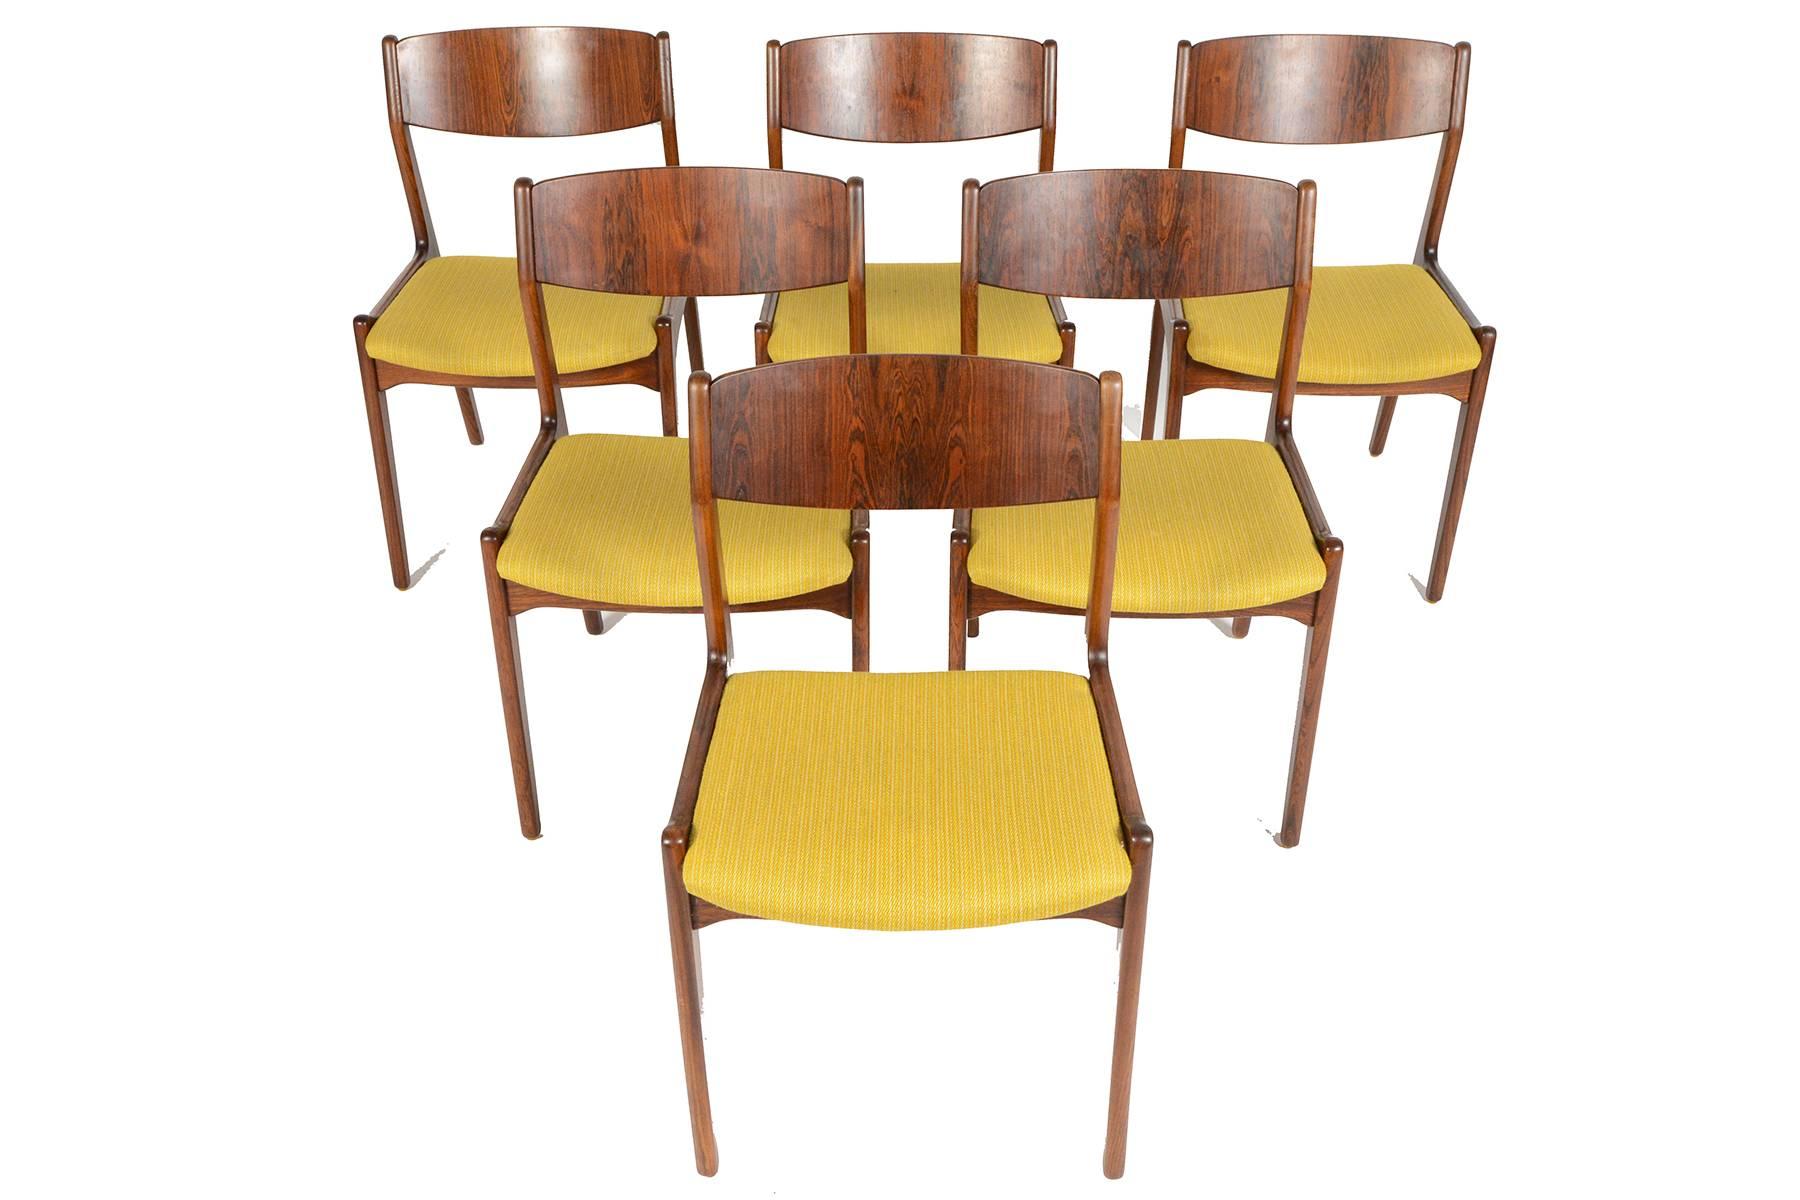 This set of six Danish modern dining chairs were manufactured by Søro Stolefabrik in the 1960s. Crafted in rosewood and stained oak, this set provides comfortable seating for both casual and formal occasions. Frames feature horned seat bottoms and